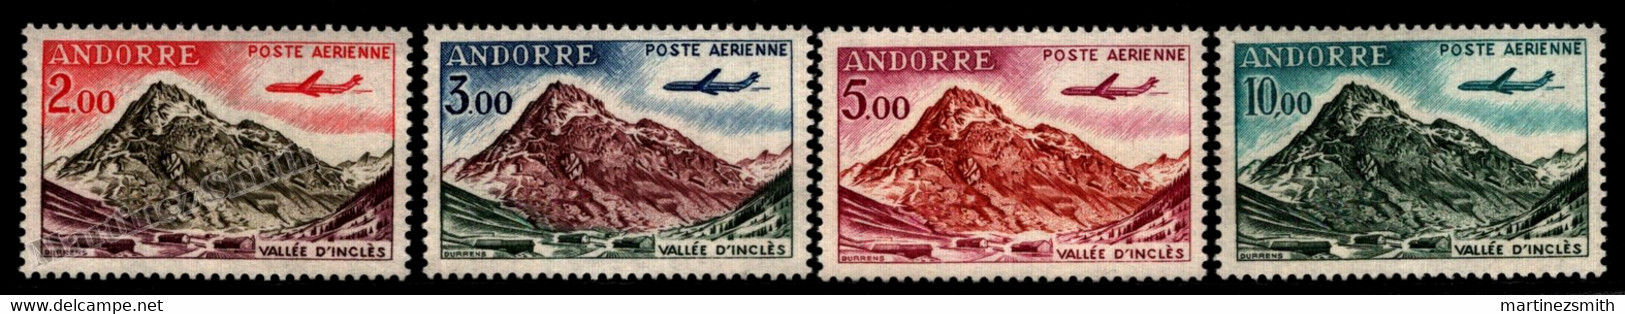 Andorre Français / French Andorra 1961 Airmail Yv. Inclès Valley, Soldeu, - MNH - Luchtpost